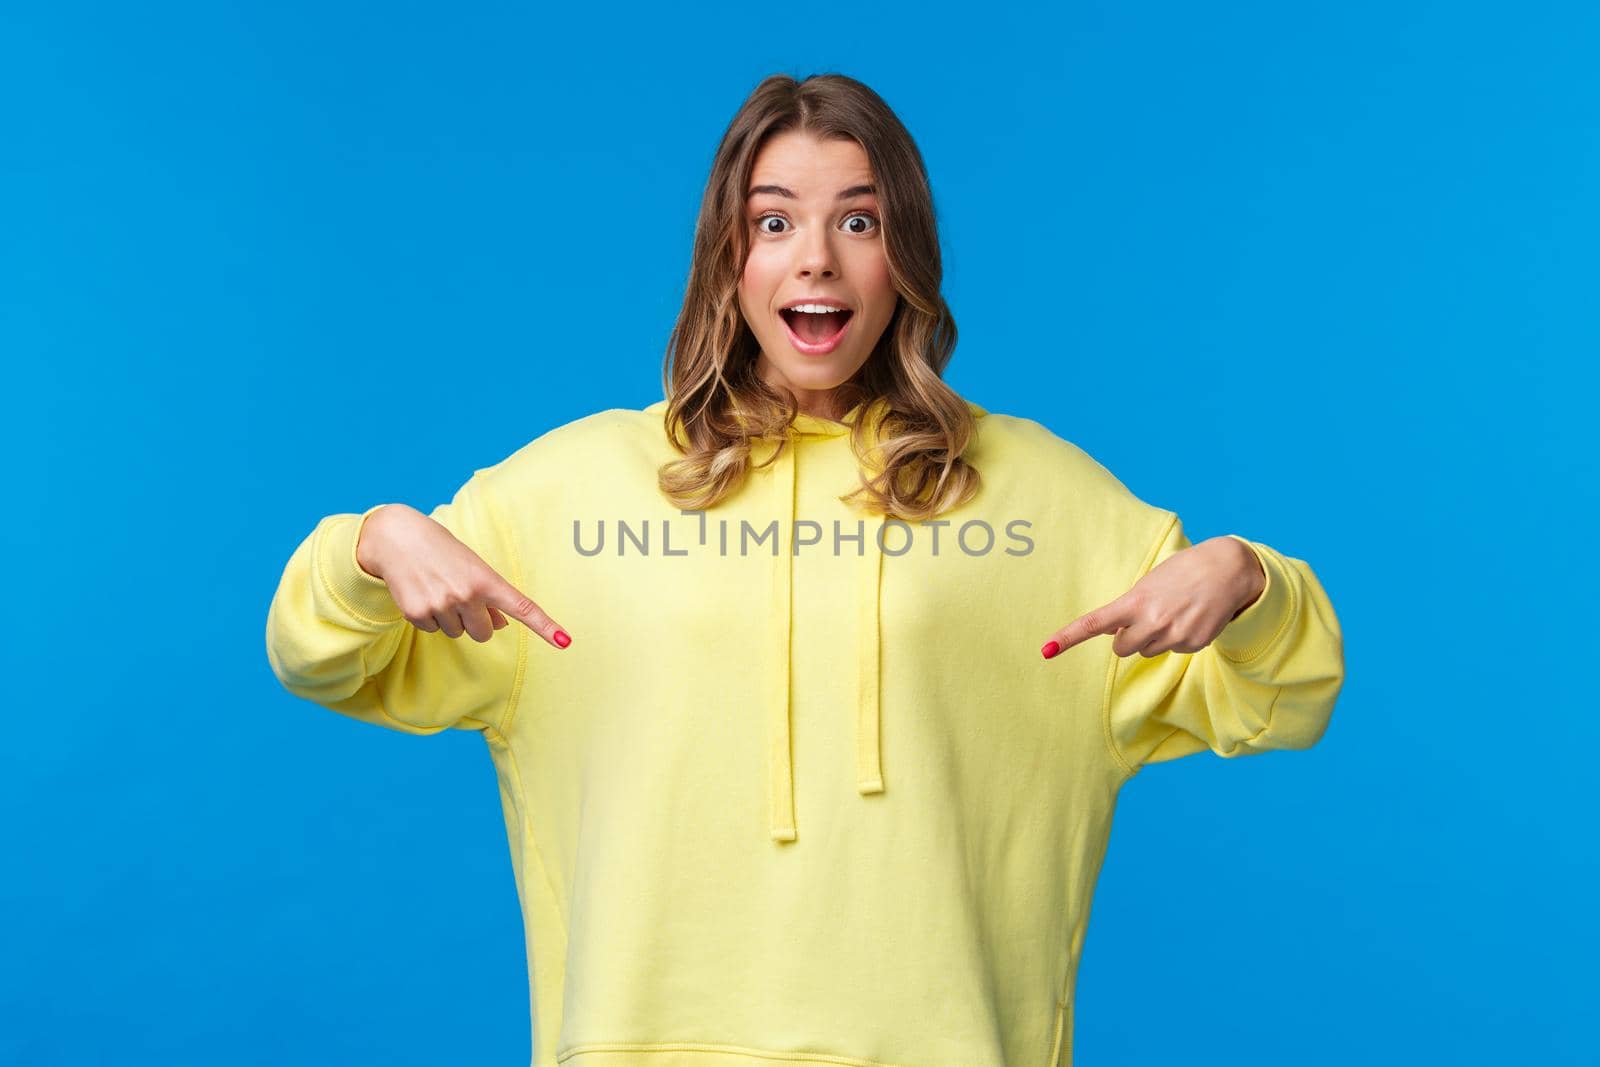 Wow thats something new. Impressed good-looking blond girl telling about awesome promo offer, best discounts, pointing fingers down and looking camera as suggest buy it, blue background.